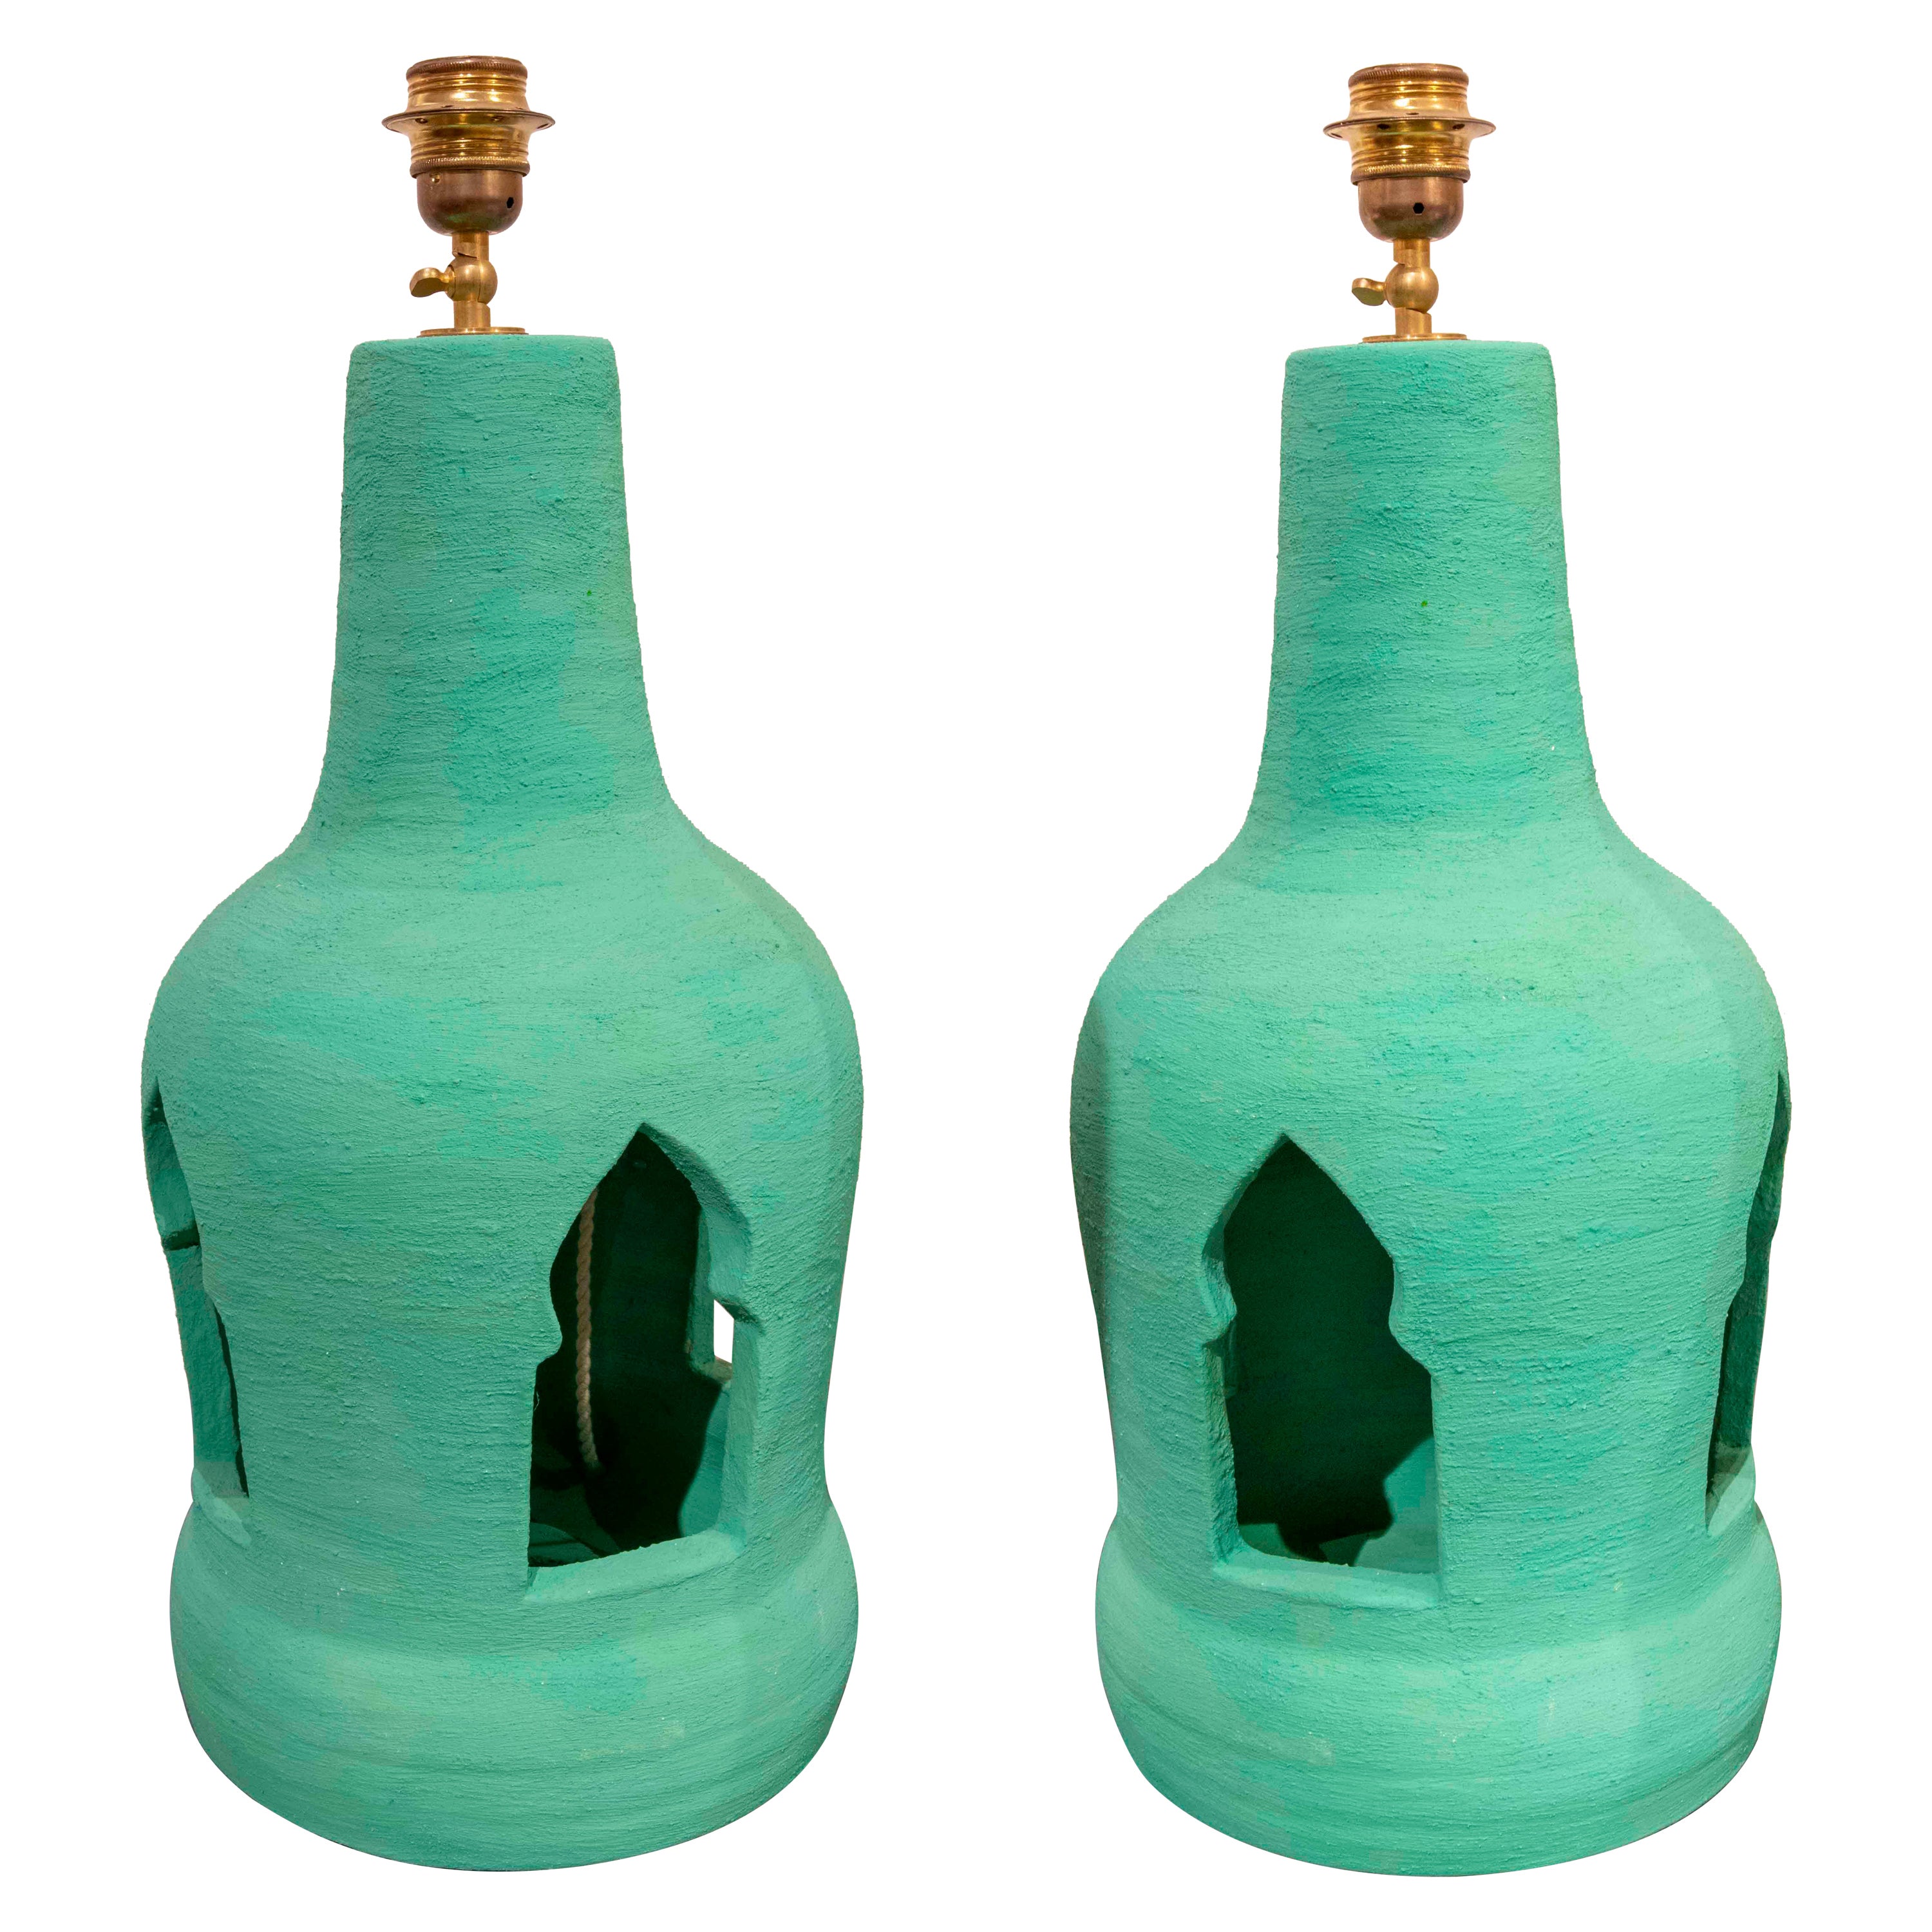 Pair of Ceramic Lamps Painted in Green Colour